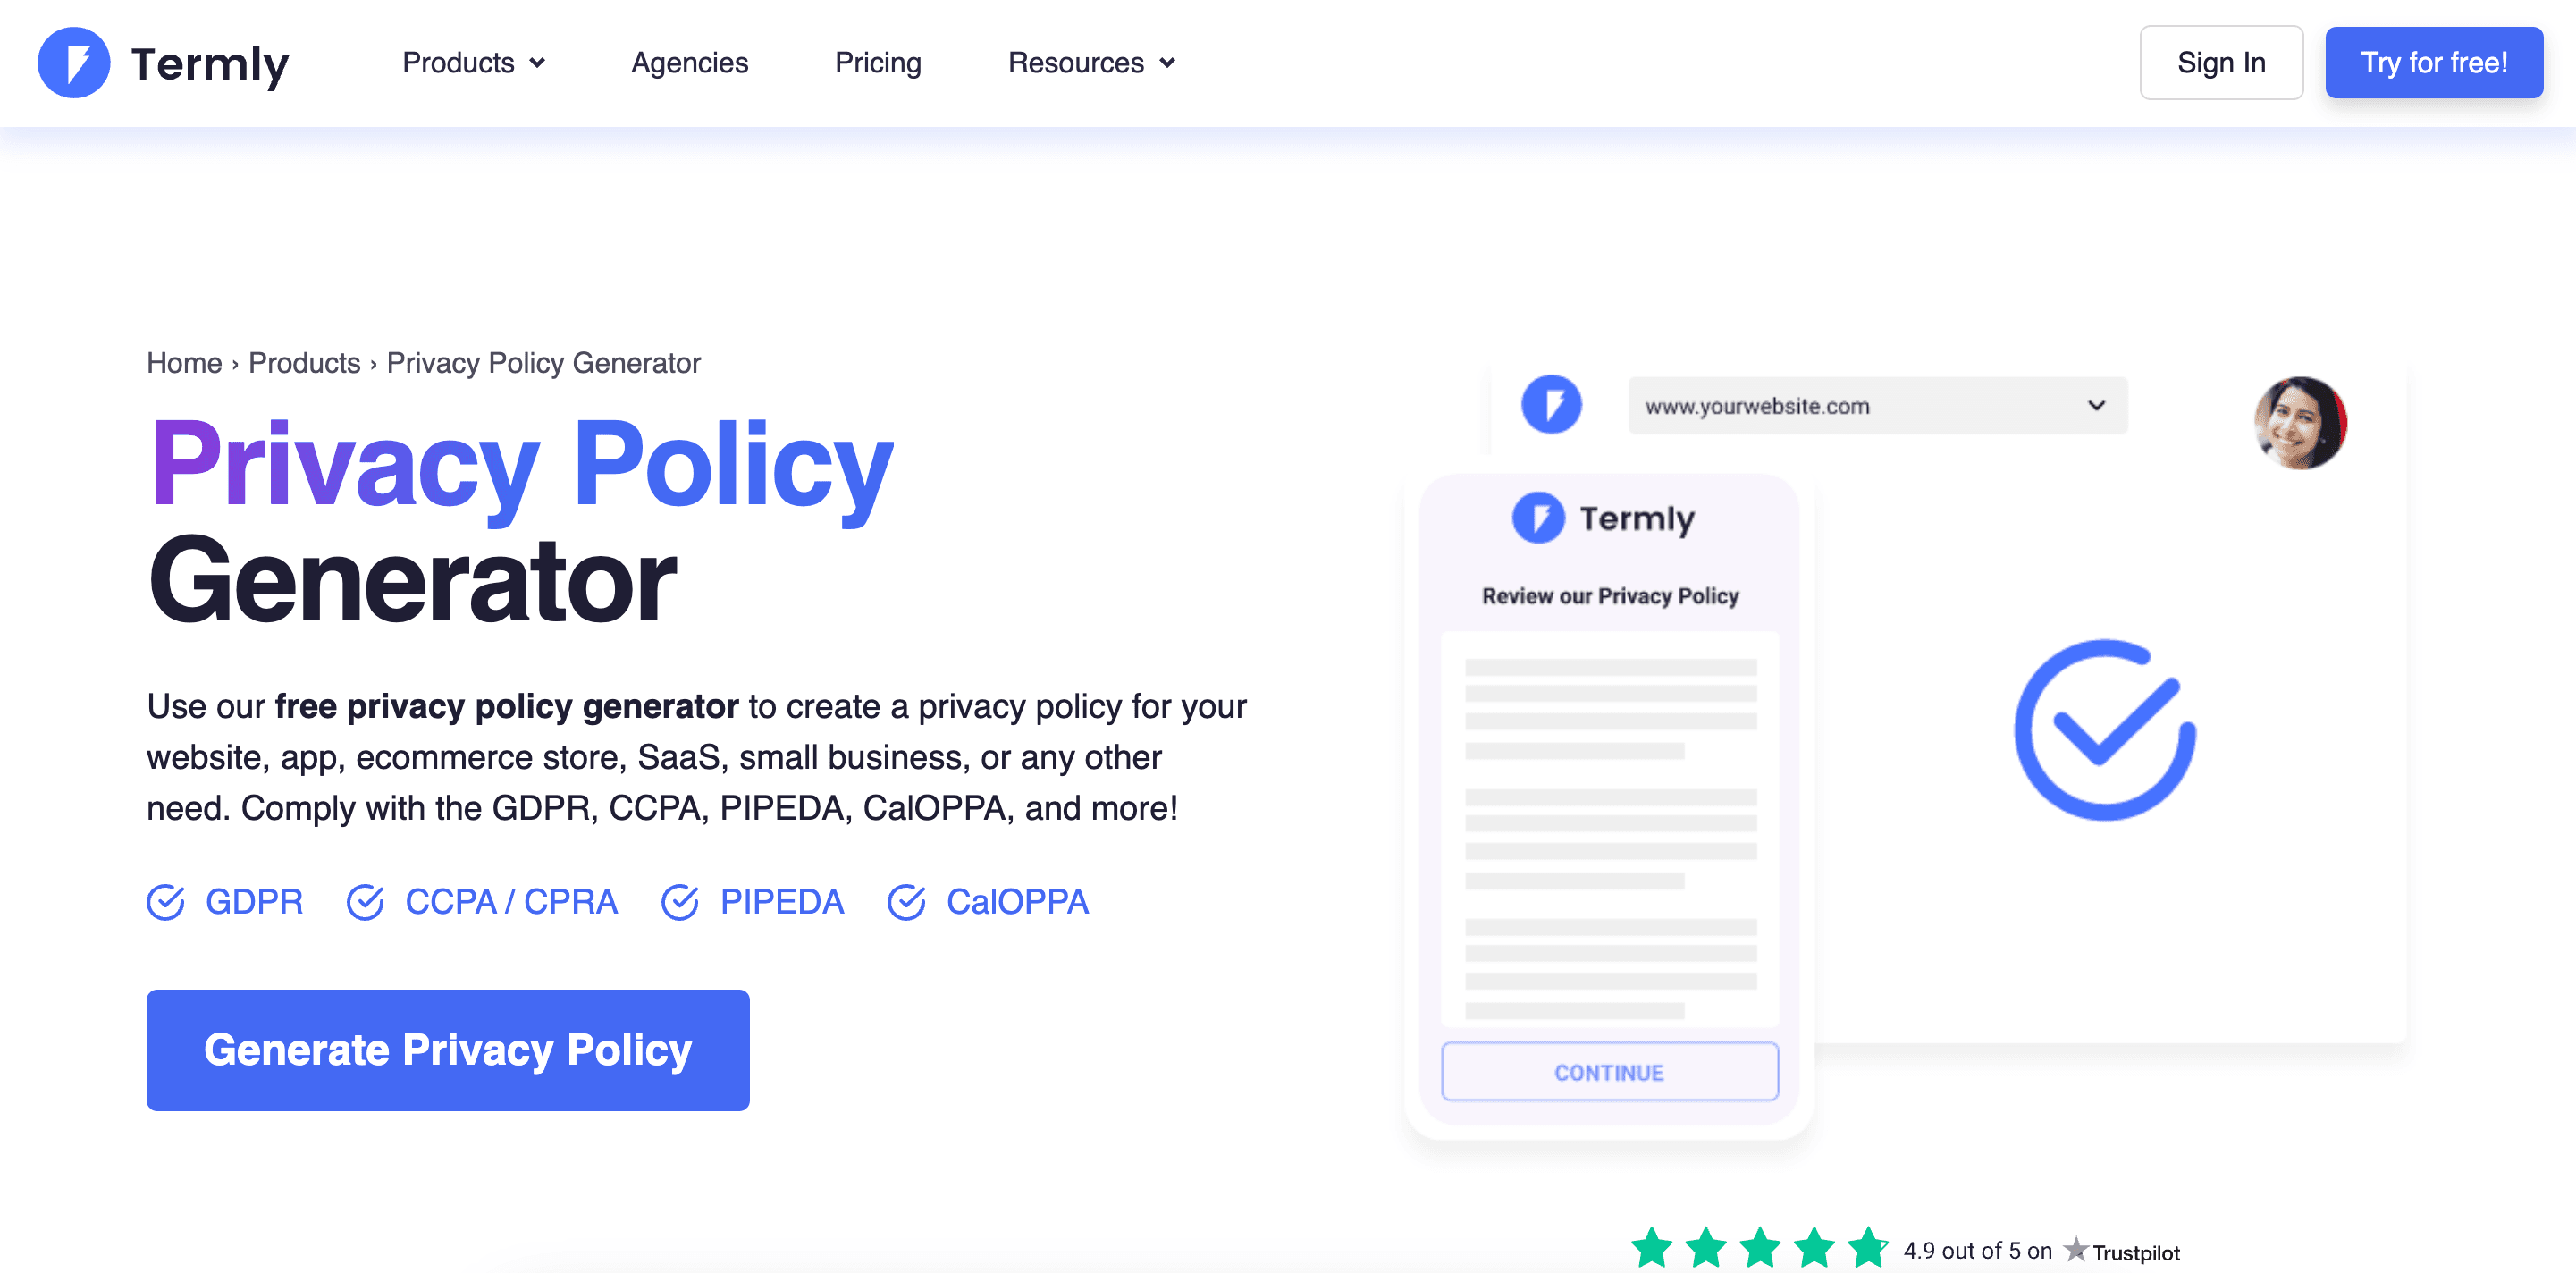 termly homepage - privacy policy generator